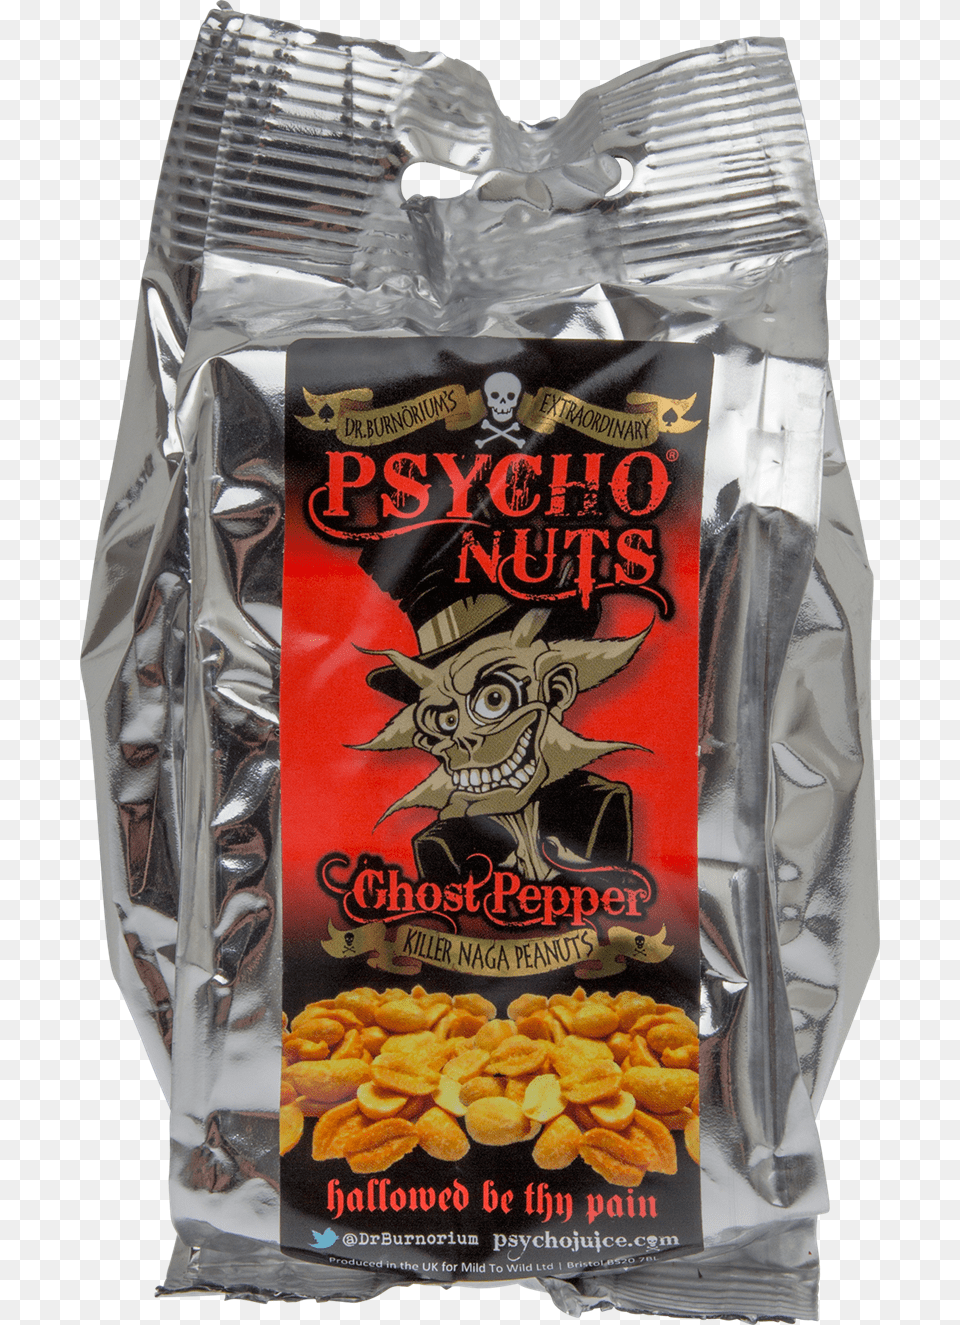 Psycho Nuts Ghost Pepper Psycho Nuts Pack Of, Food, Snack, Aluminium Free Transparent Png